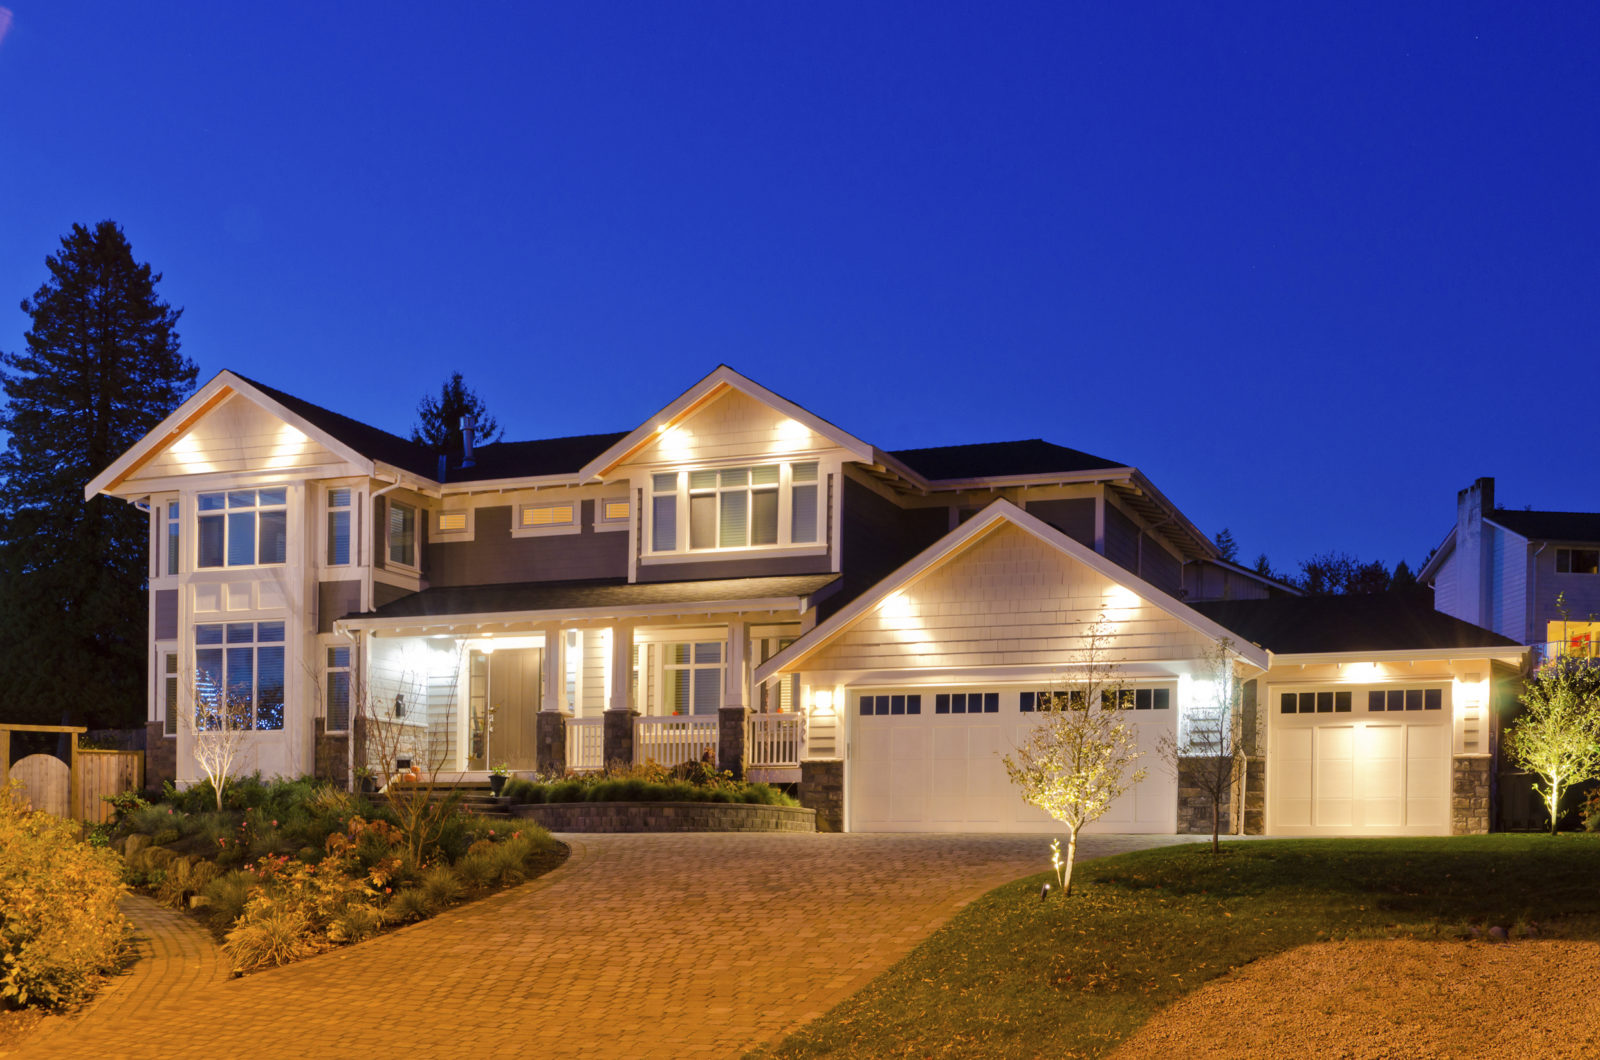 4 Reasons to Select LED Outdoor Lighting for Your Delaware Home